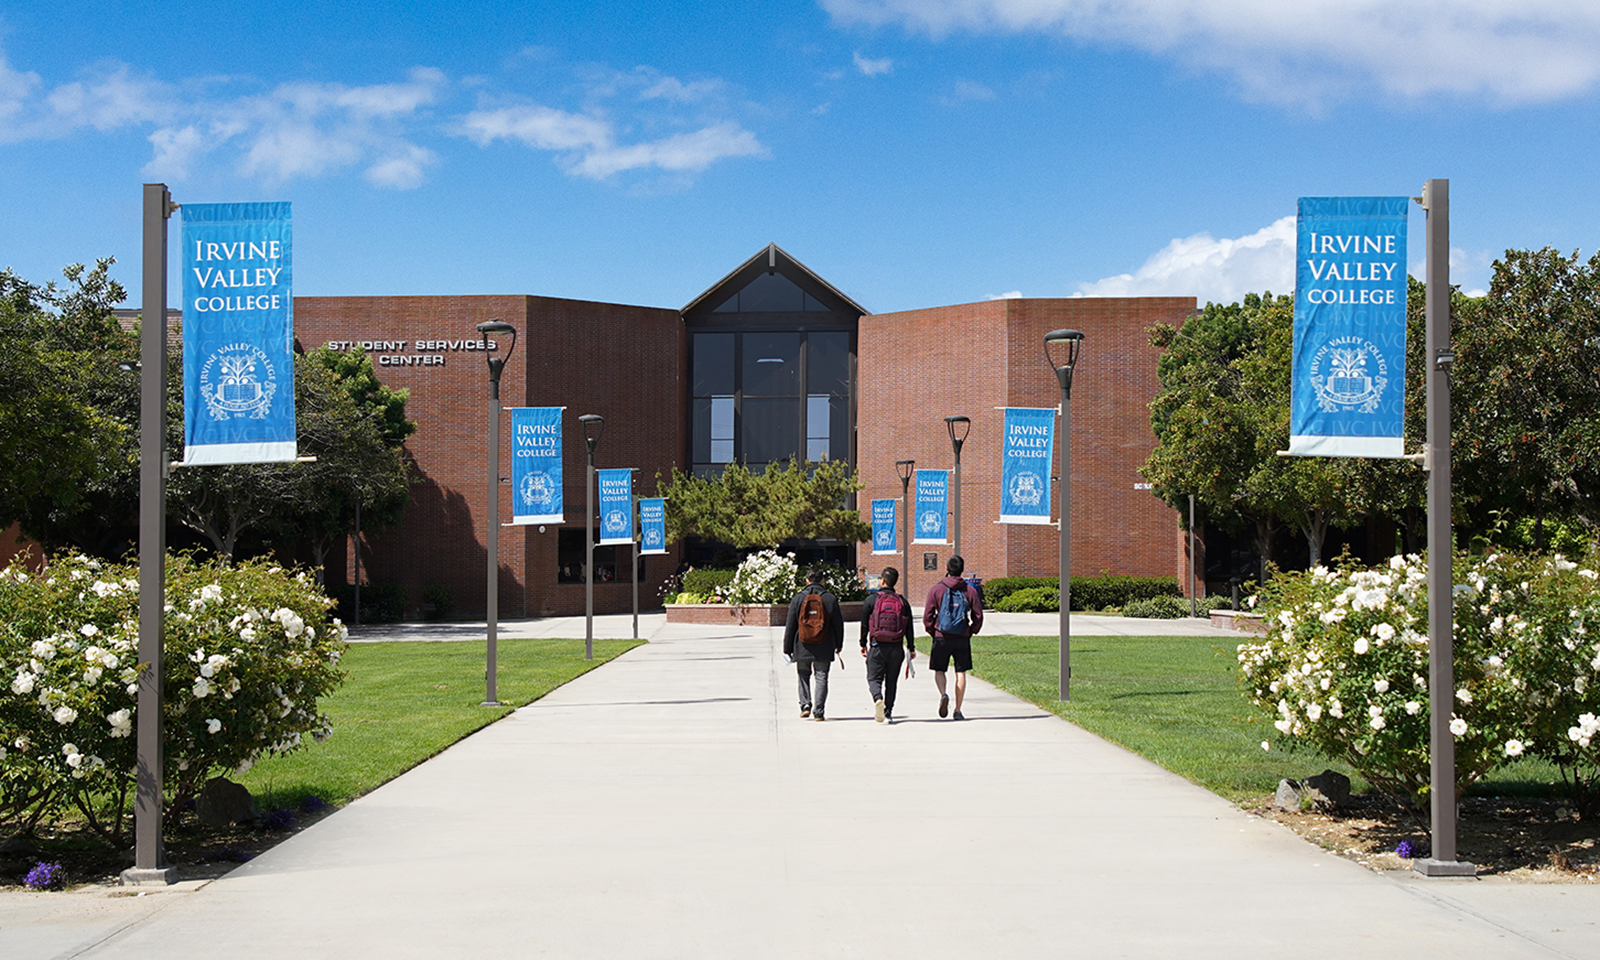 Irvine Valley College is your ticket to a UC diploma